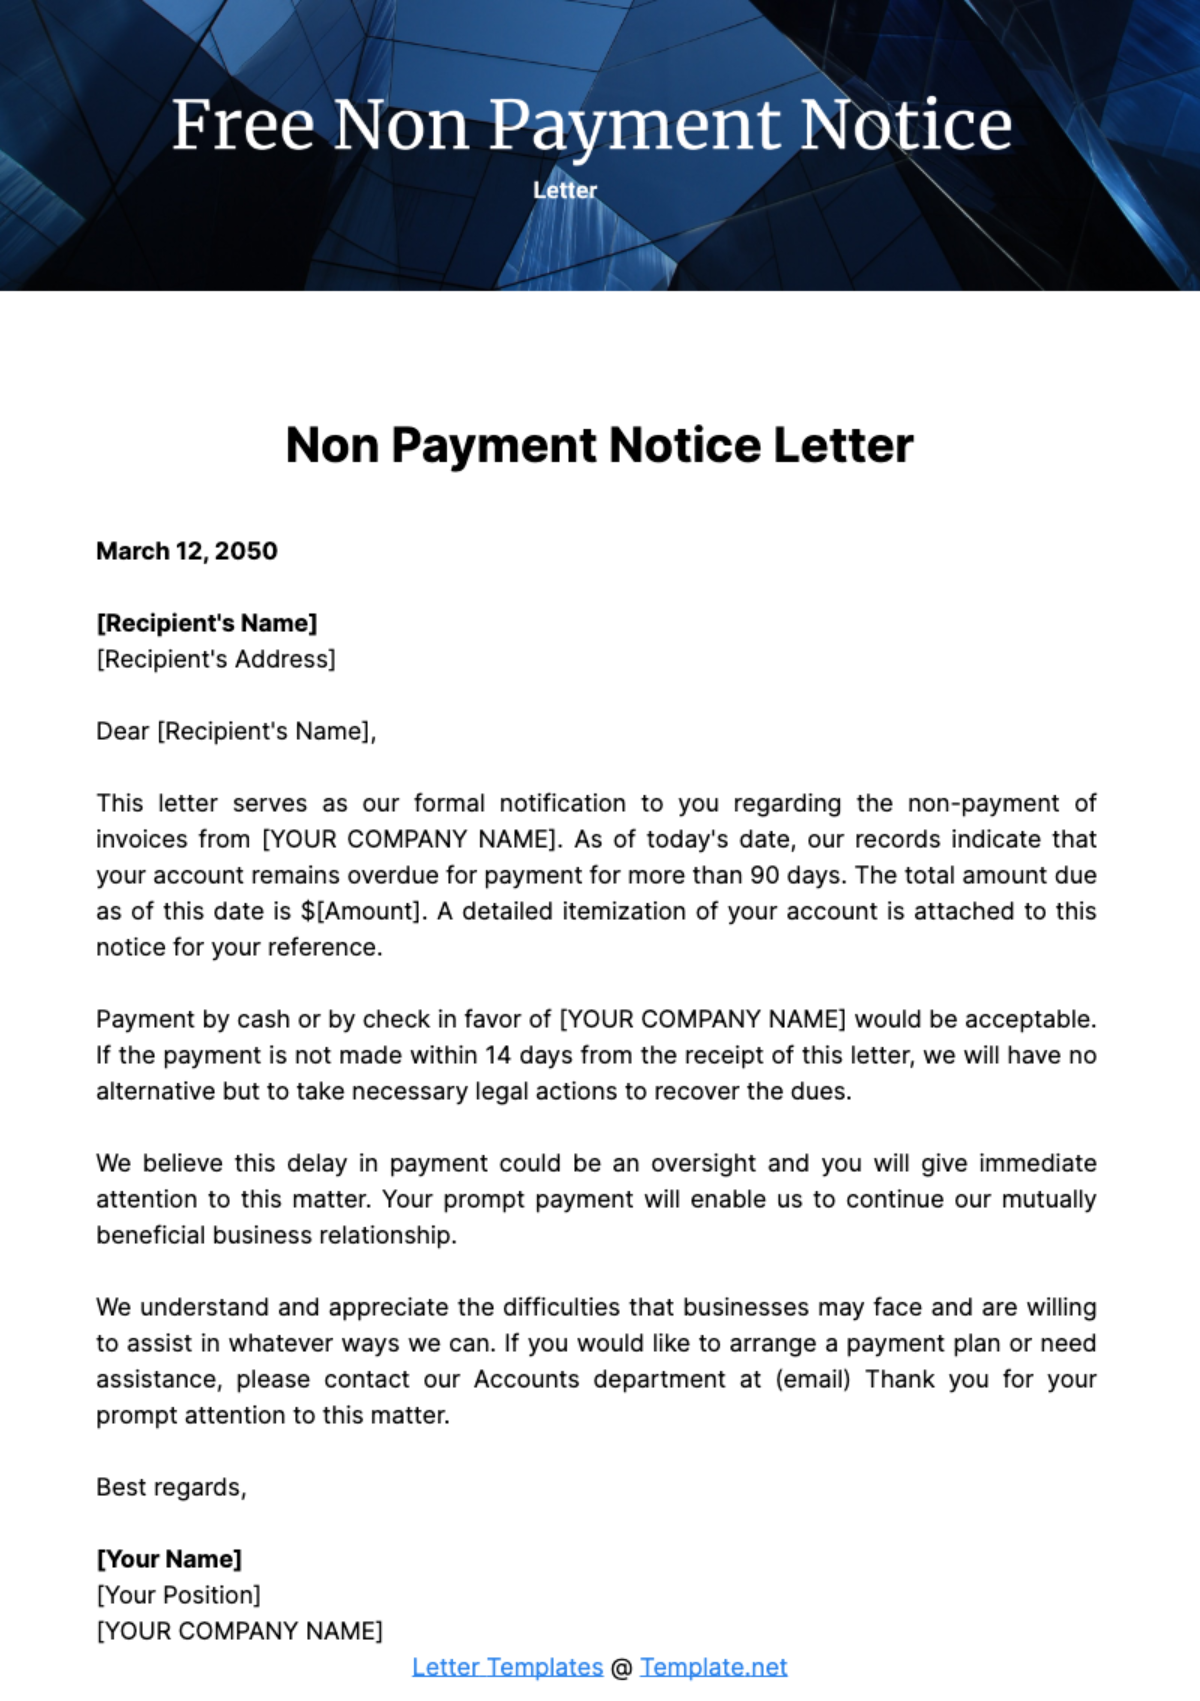 Free Non Payment Notice Letter Template